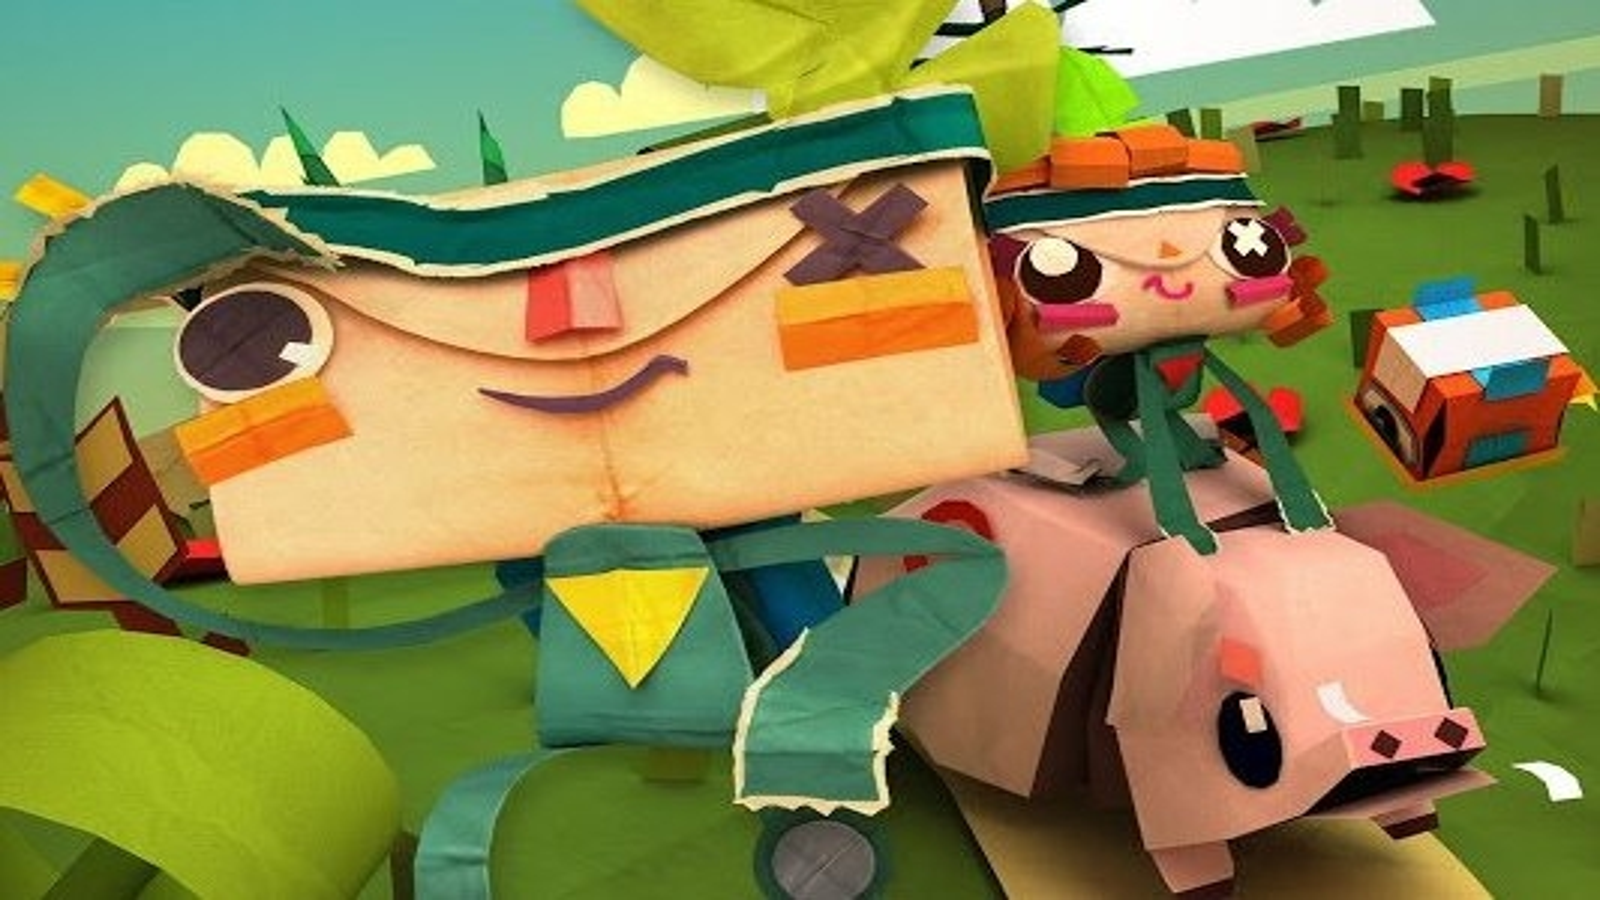 https://assetsio.gnwcdn.com/tearaway-unfolded-review-1441609106931.jpg?width=1600&height=900&fit=crop&quality=100&format=png&enable=upscale&auto=webp